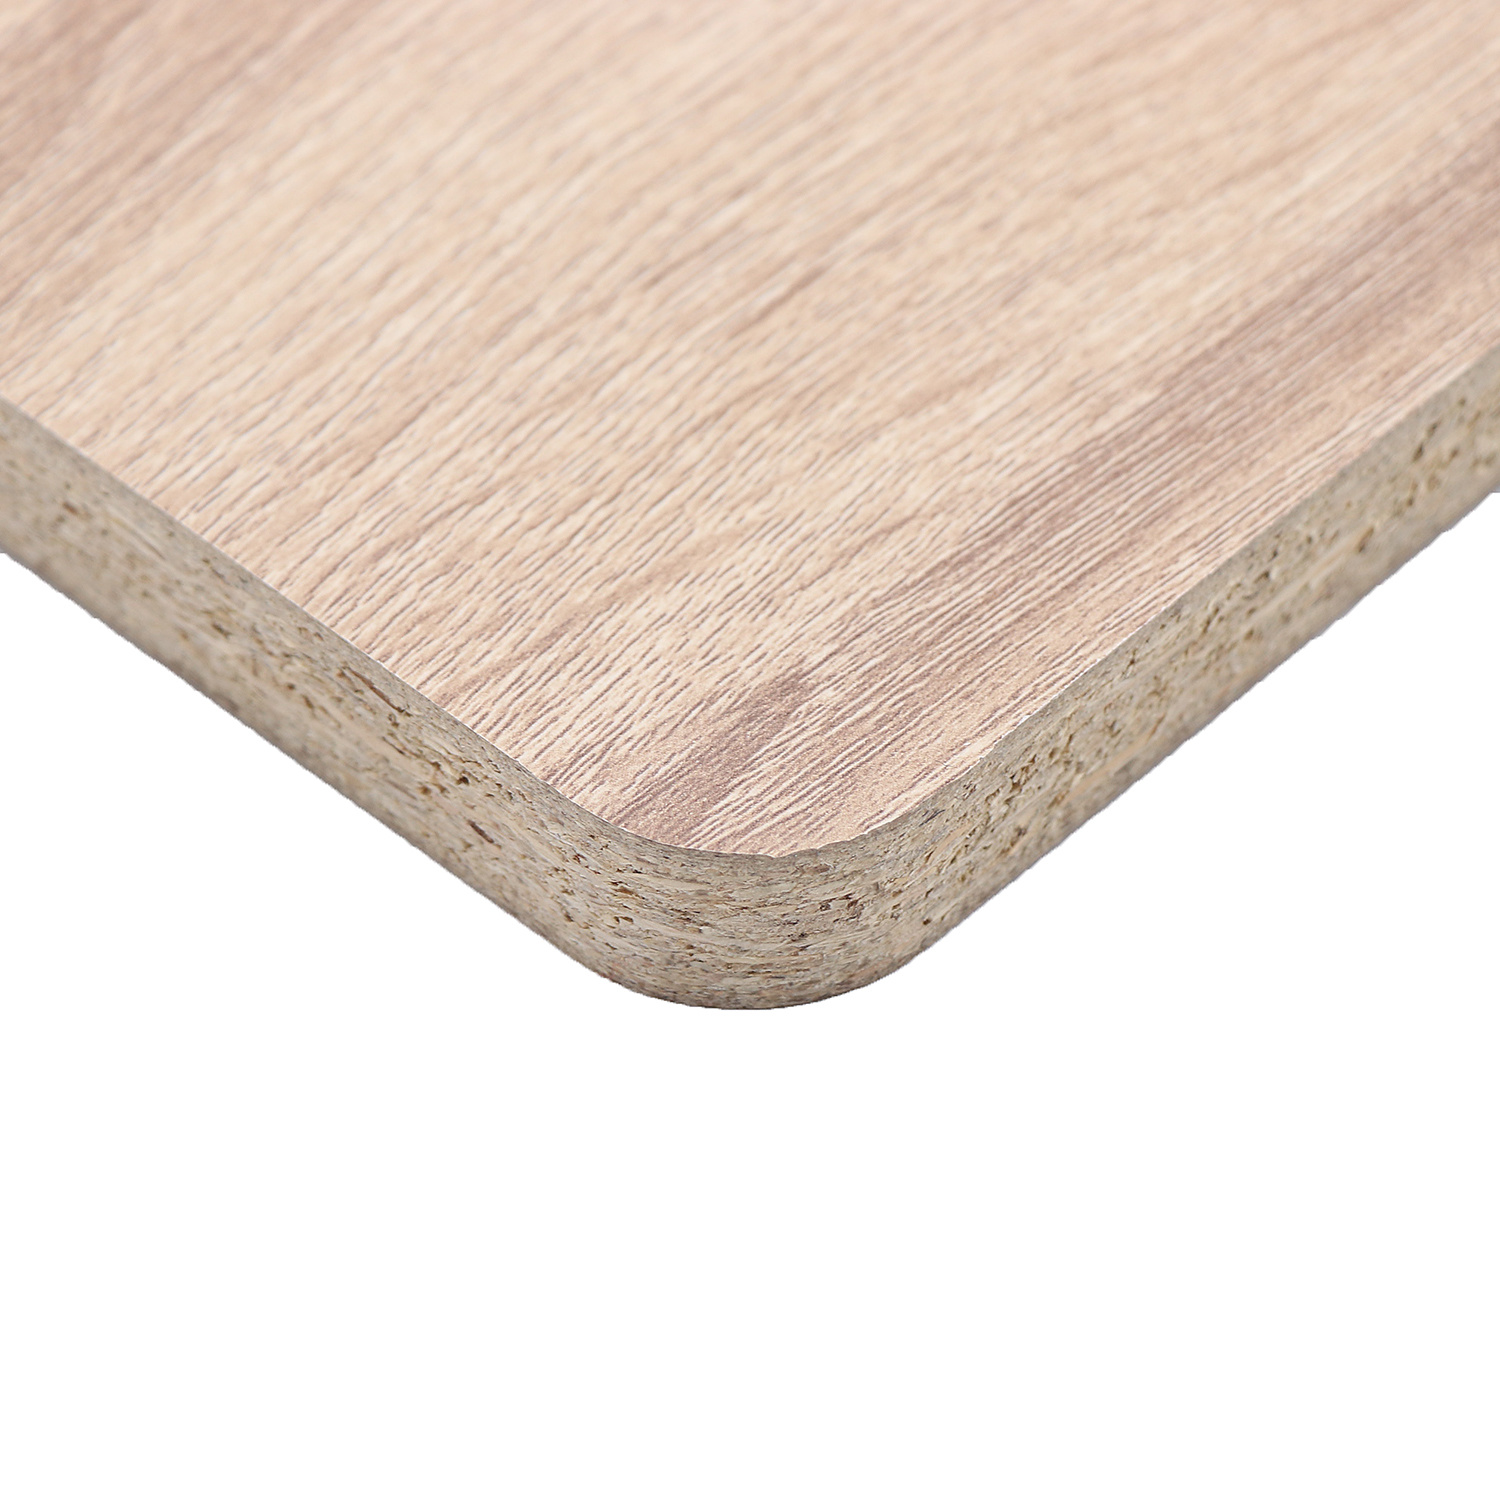 10% off 18mm Wholesale Particle Board/Chipboard/Wood Ply Wood Melamine Laminated Board Price for Furniture